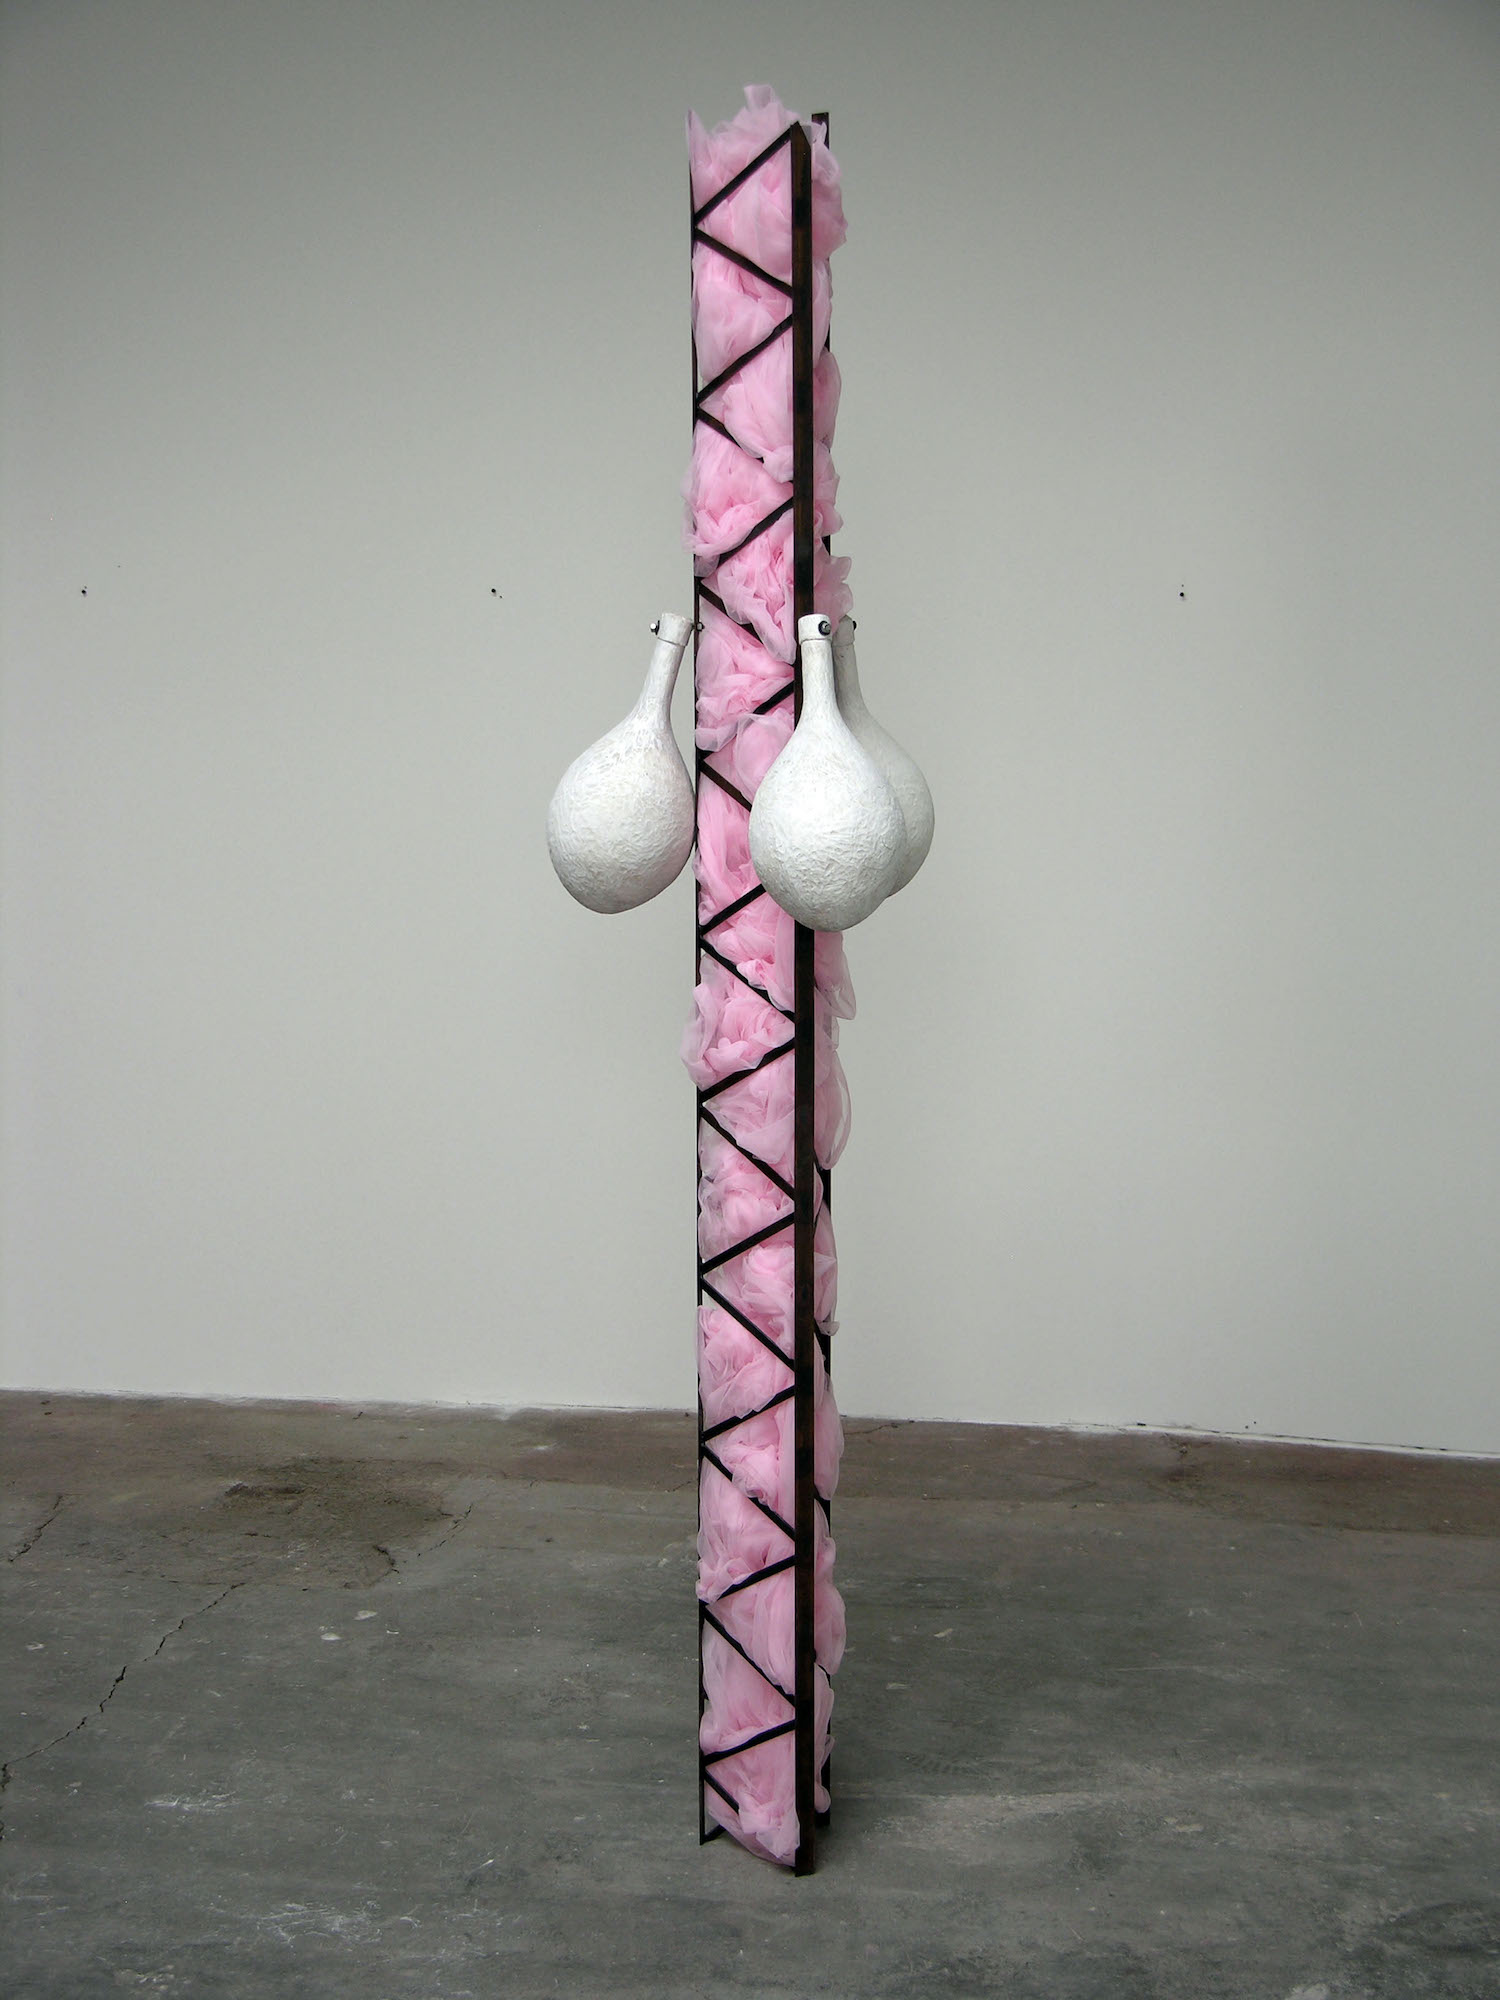  S Machine (2007), tutu fabric, steel, wood  A few feet away, “S. Machine,” another hollow steel truss, flirts with other modalities. It is lightly stuffed with a pink gauzy material evoking the feminine; dangling one third of the way from the top ar